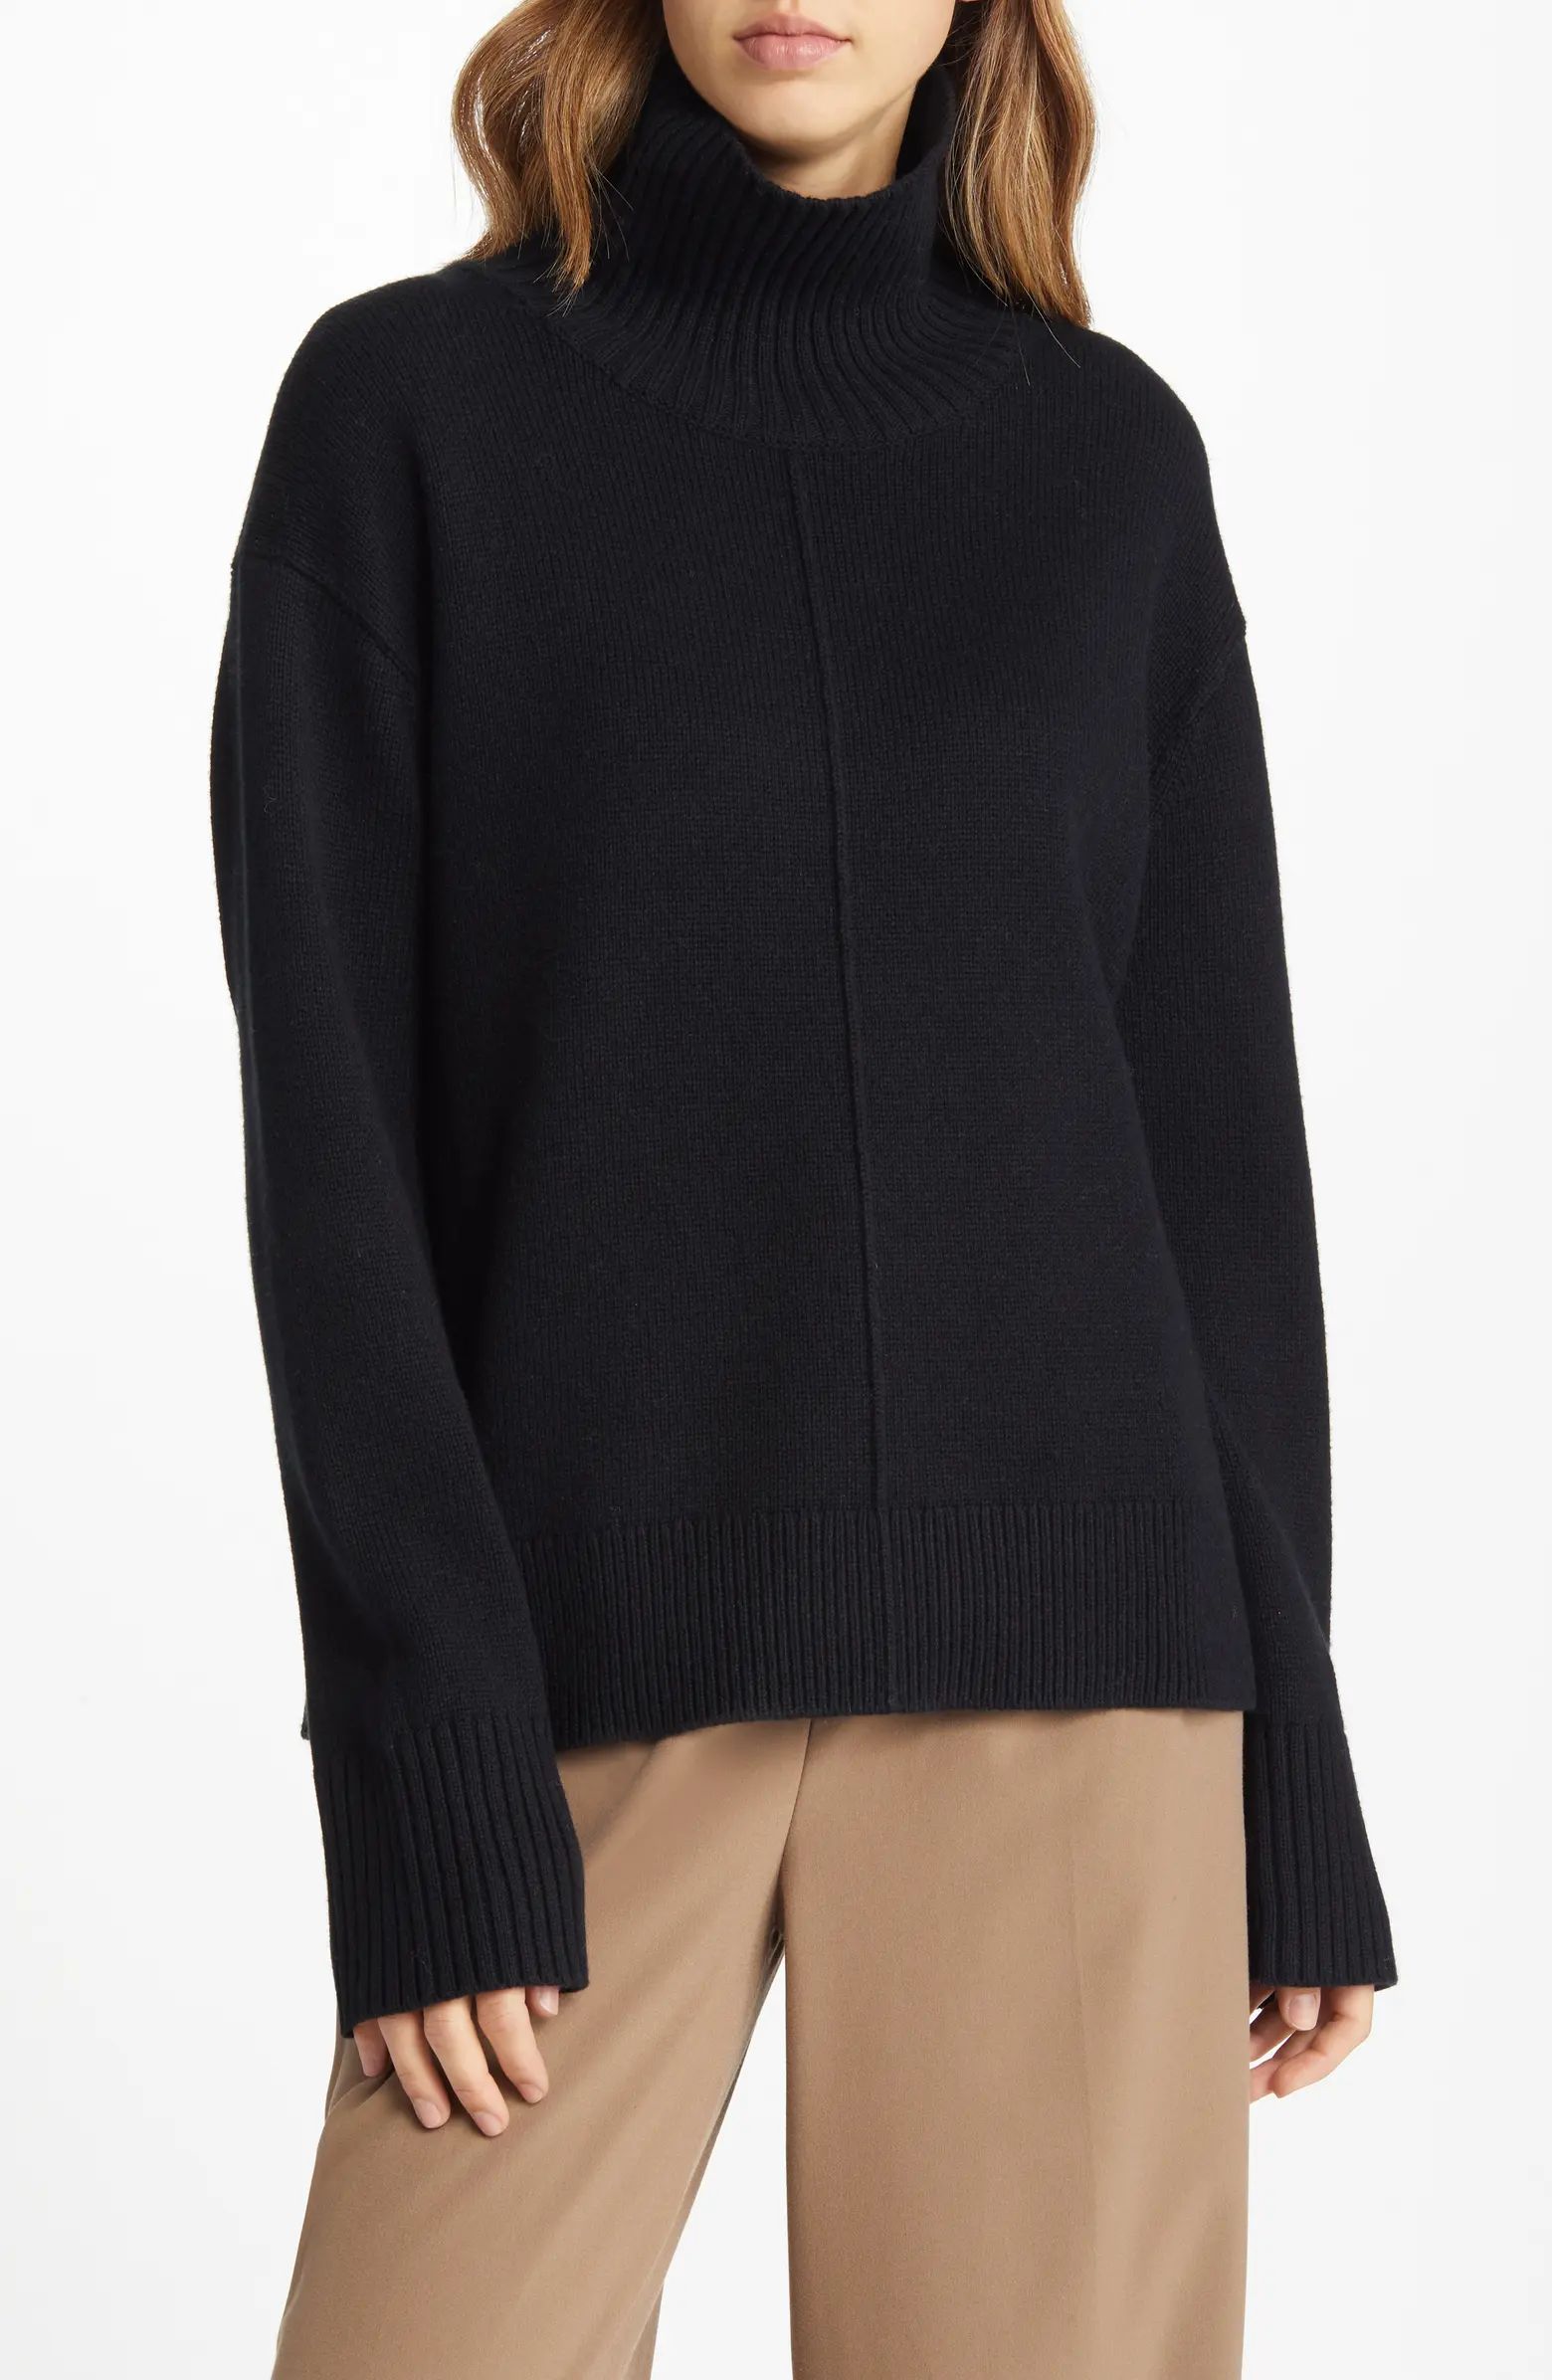 Nordstrom Boxy Cotton & Wool Funnel Neck Sweater | Nordstrom | Nordstrom